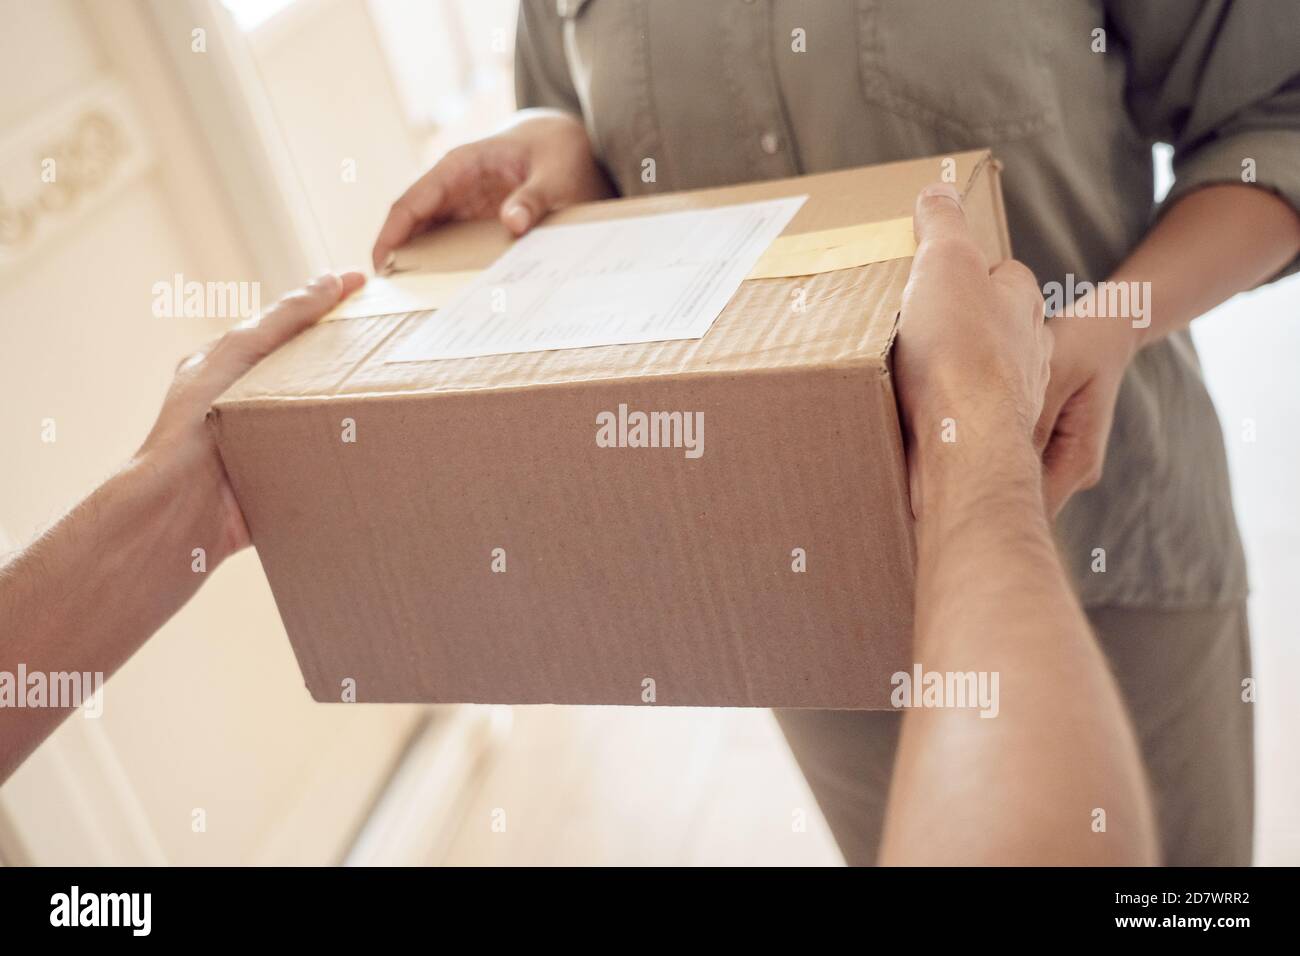 Female customer receiving courier service delivery parcel box at home, close up. Stock Photo